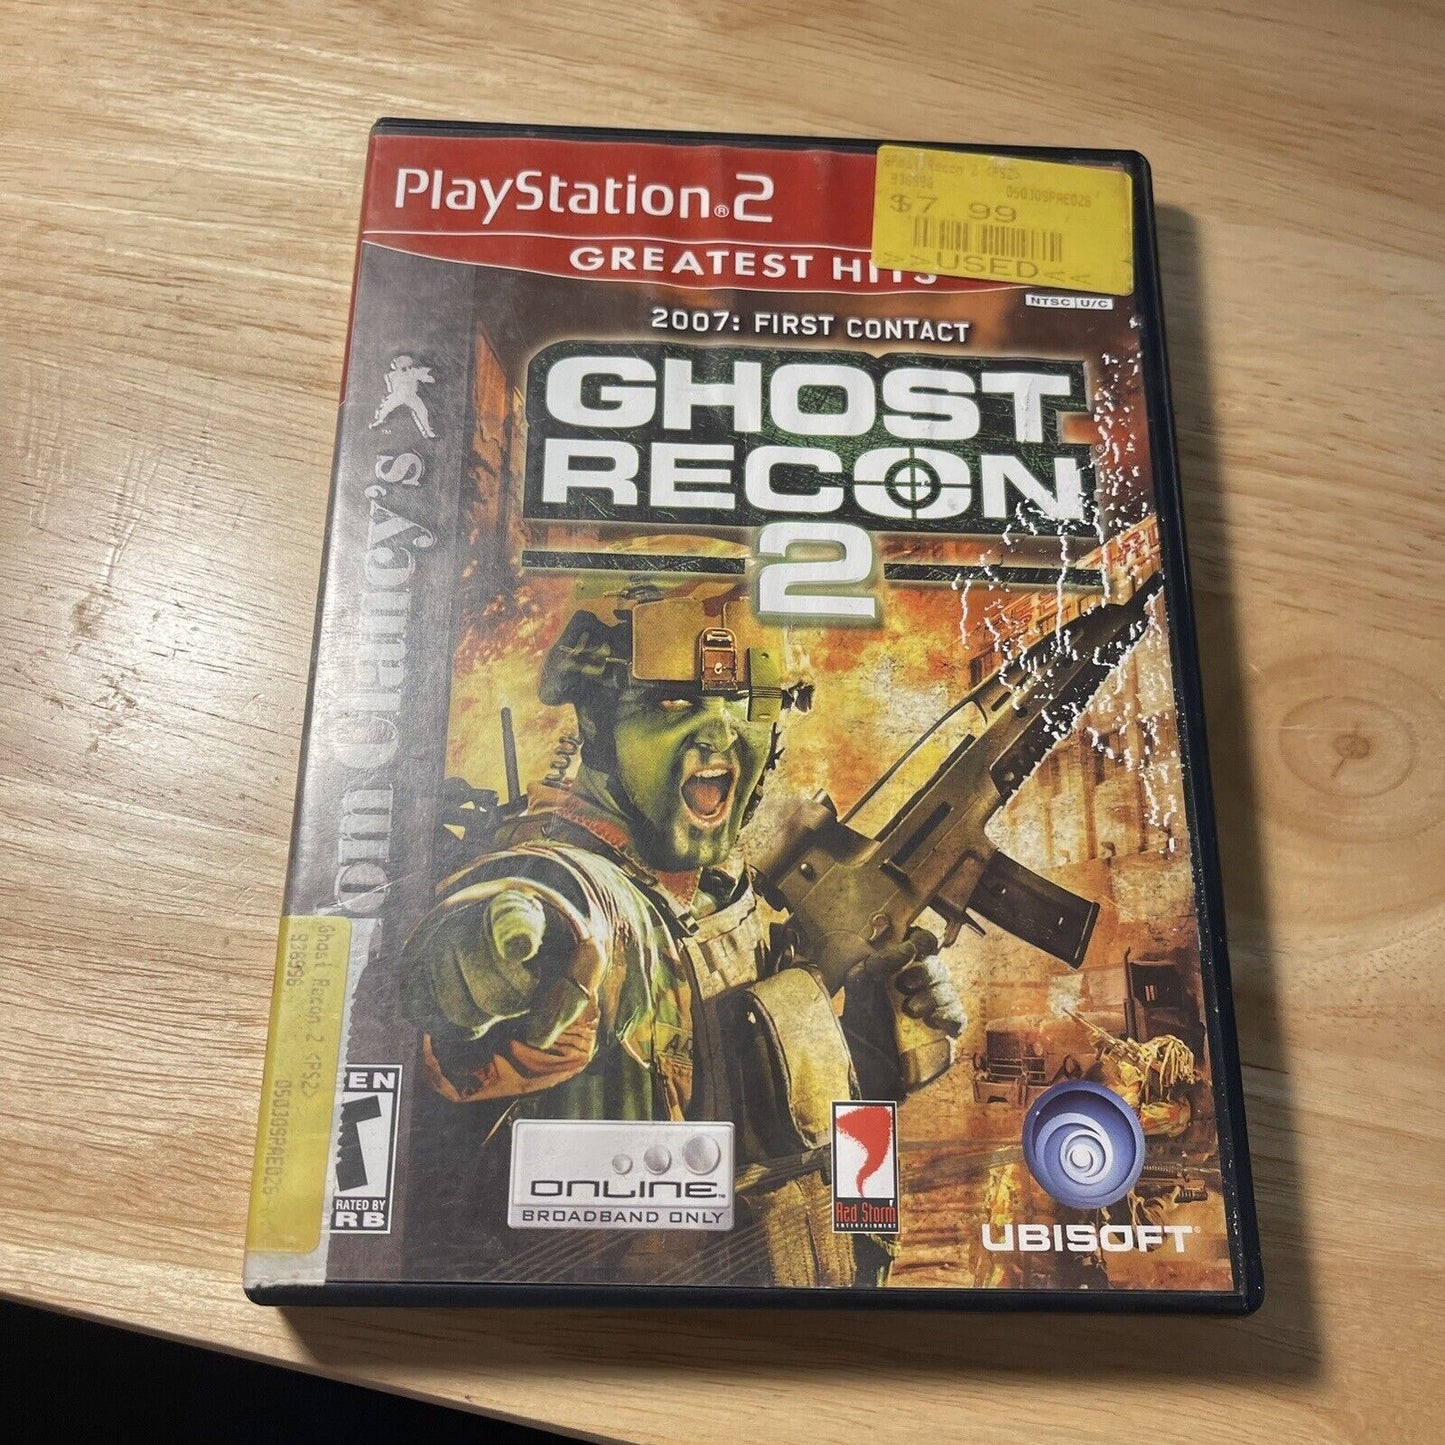 Tom Clancy's Ghost Recon 2 PS2 - Game & Case Great Condition Tested Works